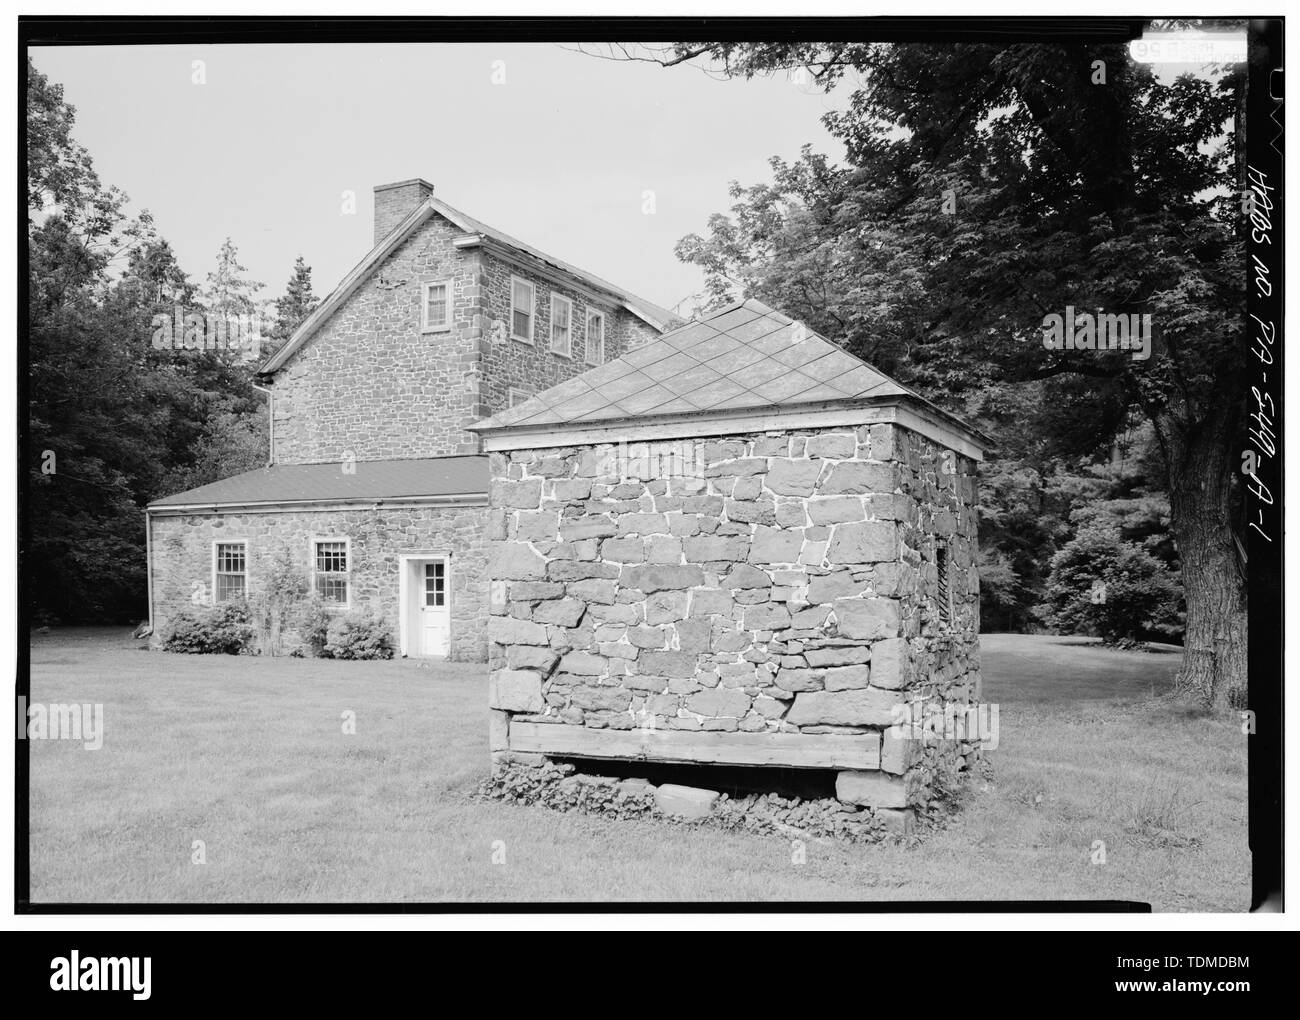 PERSPECTIVE VIEW OF WEST (REAR) SHOWING OPENING OR CLEAN-OUT FOR PRIVY AT BOTTOM, AND RELATIONSHIP OF SOUTH OUTBUILDING TO THE MAIN HOUSE IN BACKGROUND - Naylor House, Privy, Swift and Silver Lake Roads, Langhorne, Bucks County, PA; Klugh, T, transmitter; Boucher, Jack E, photographer Stock Photo